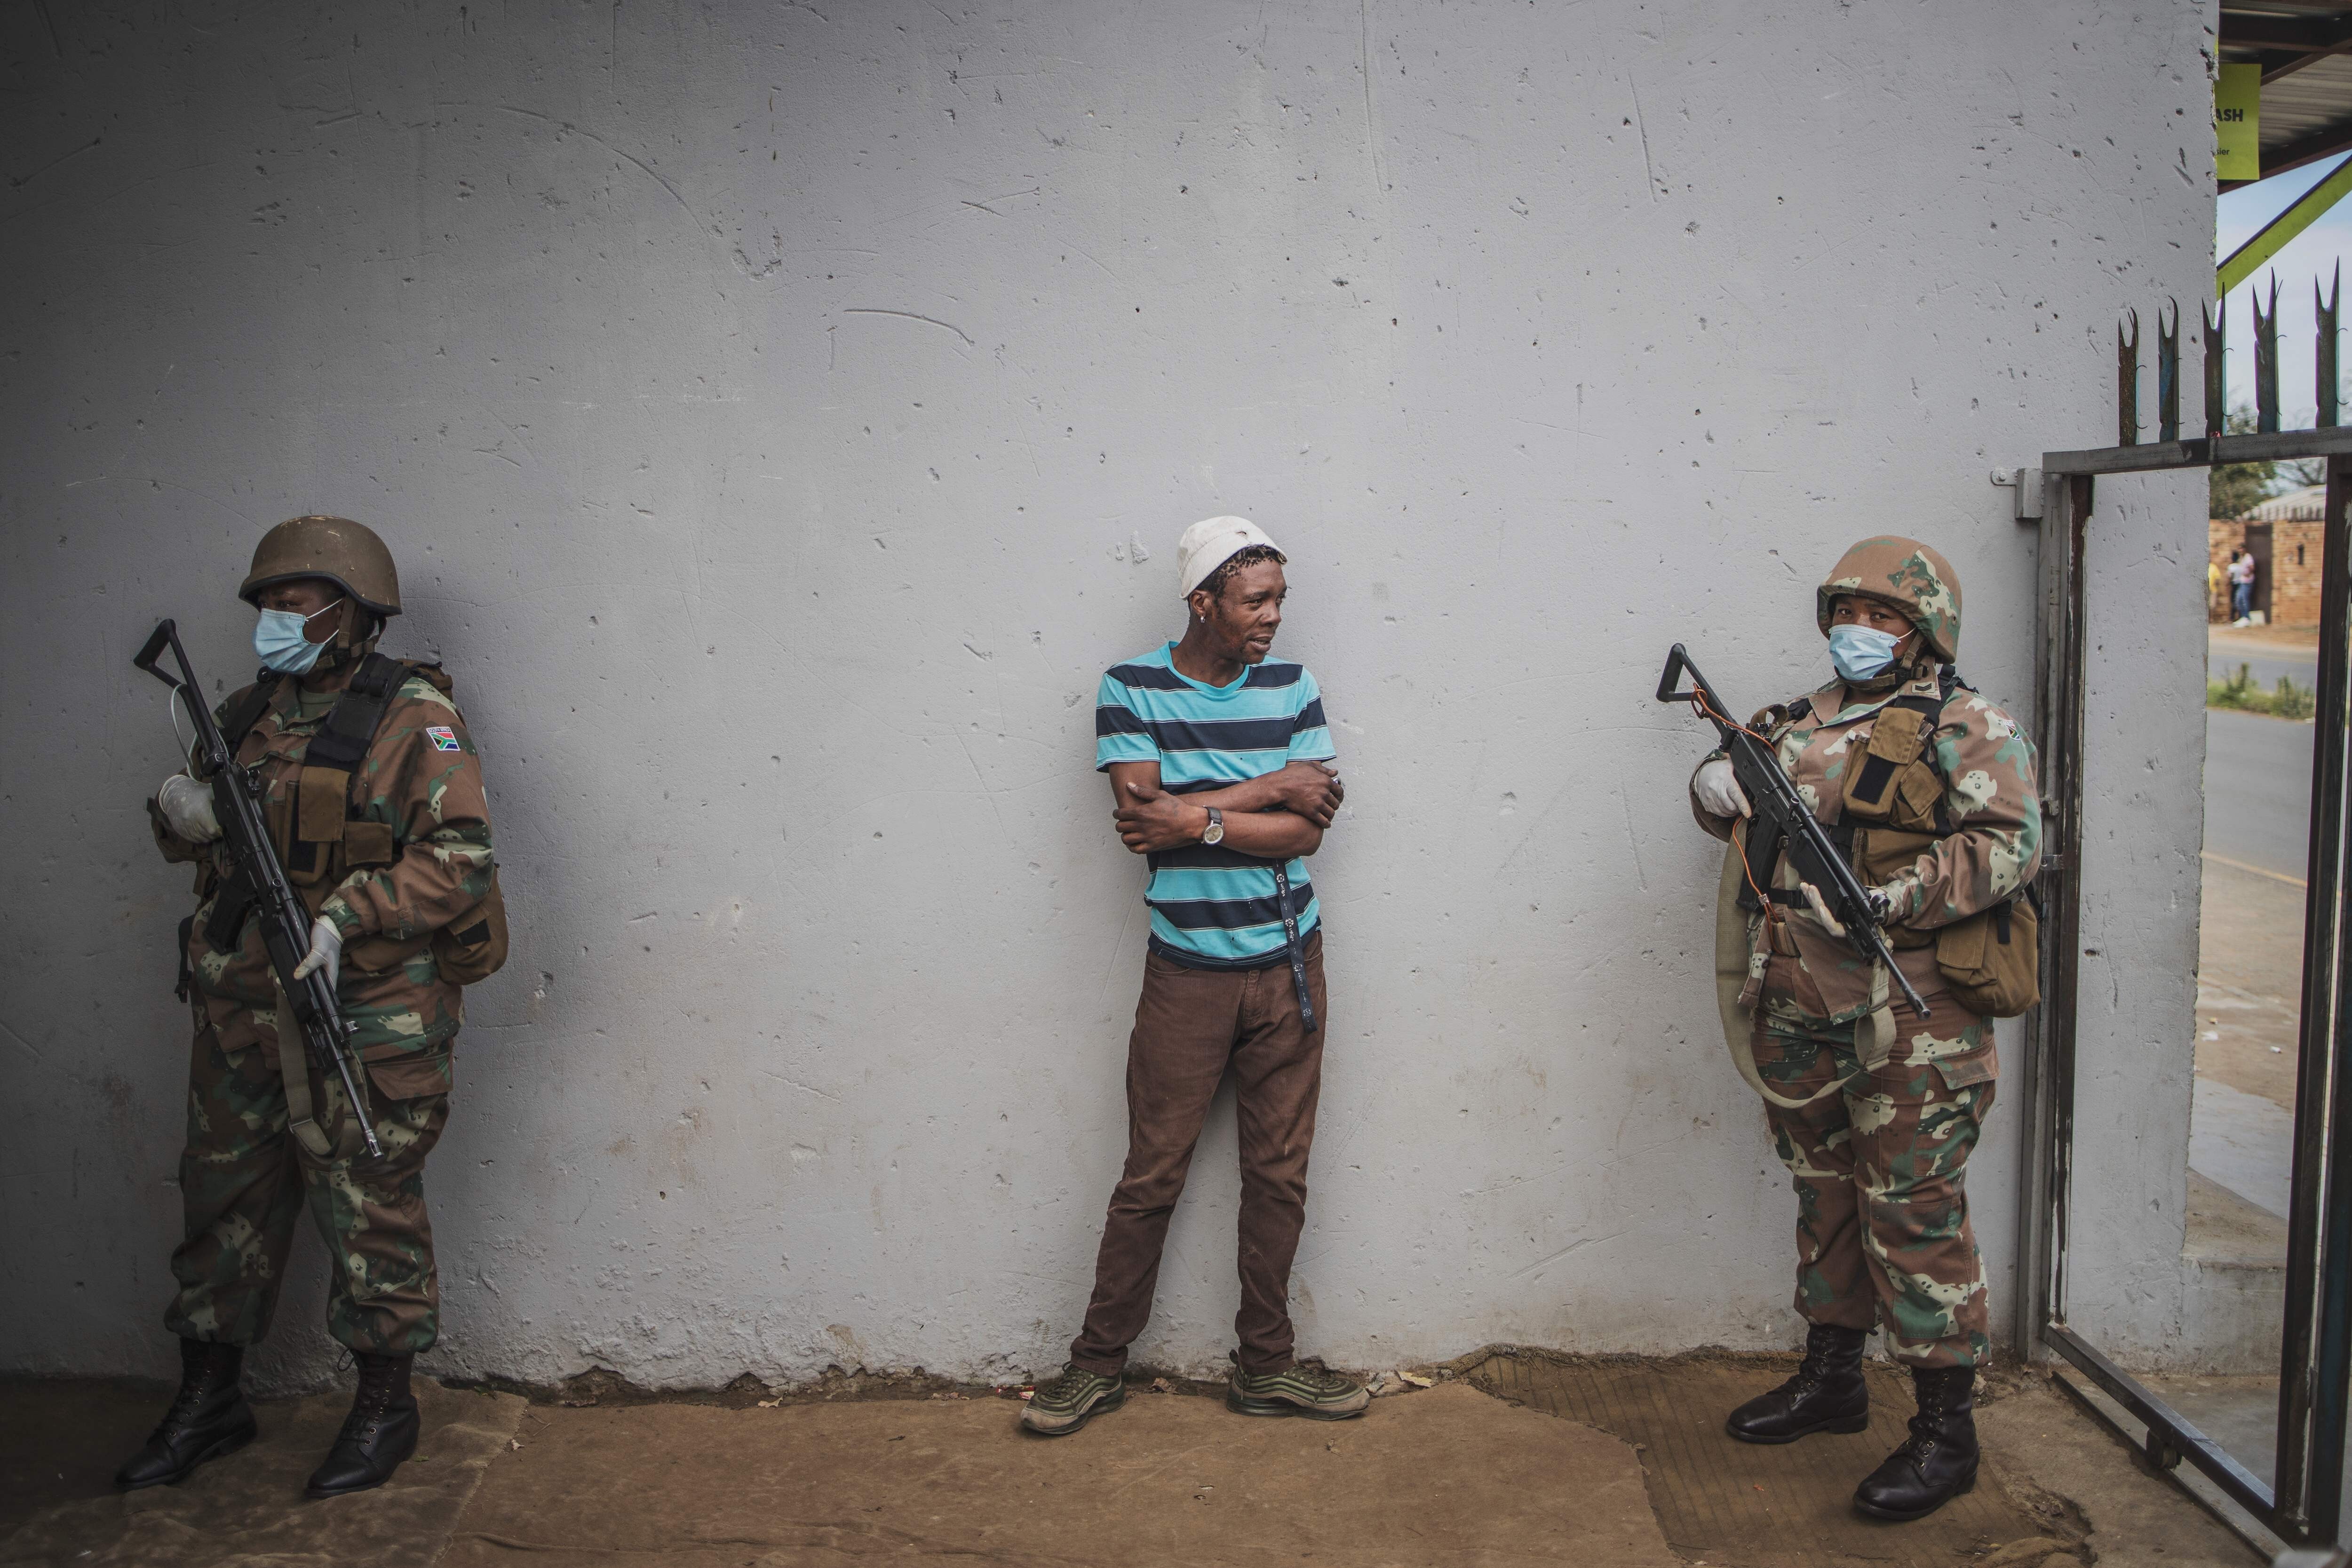 A man is questioned by a South African National Defence Force patrol after his corner shop was found open in Eldorado Park on March 30. South Africa came under a nationwide lockdown on March 27, joining other African countries imposing strict curfews and shutdowns in an attempt to halt the spread of Covid-19. Photo: AFP